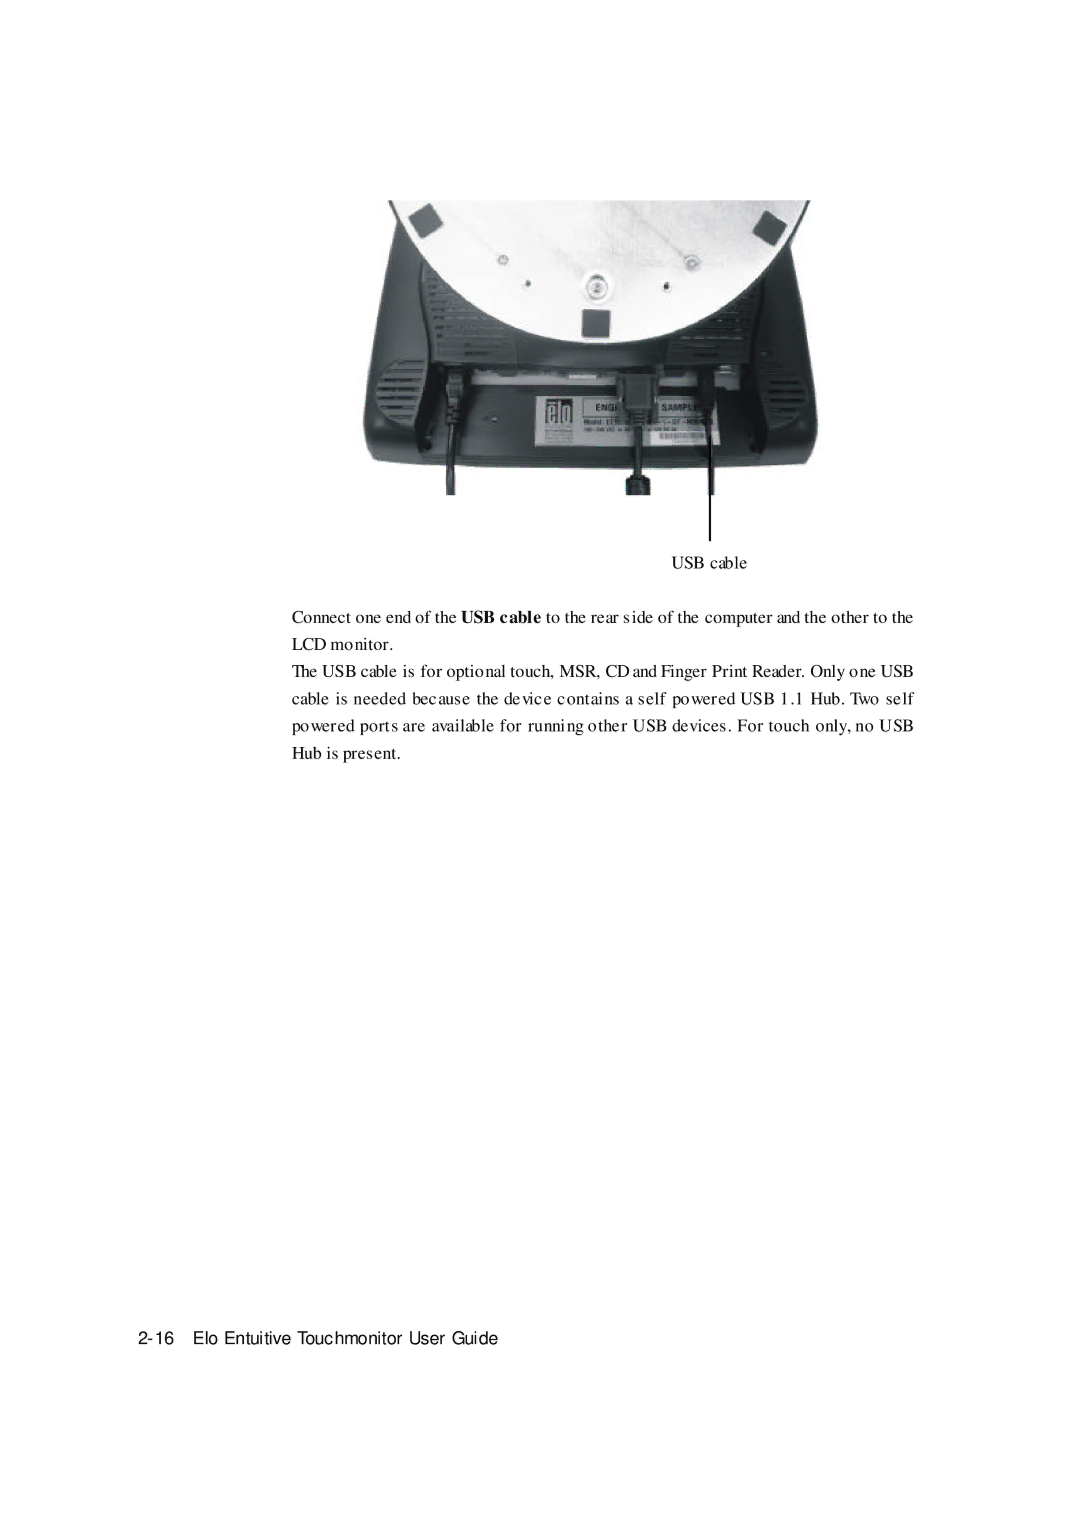 Elo TouchSystems ET1529L manual Elo Entuitive Touchmonitor User Guide 